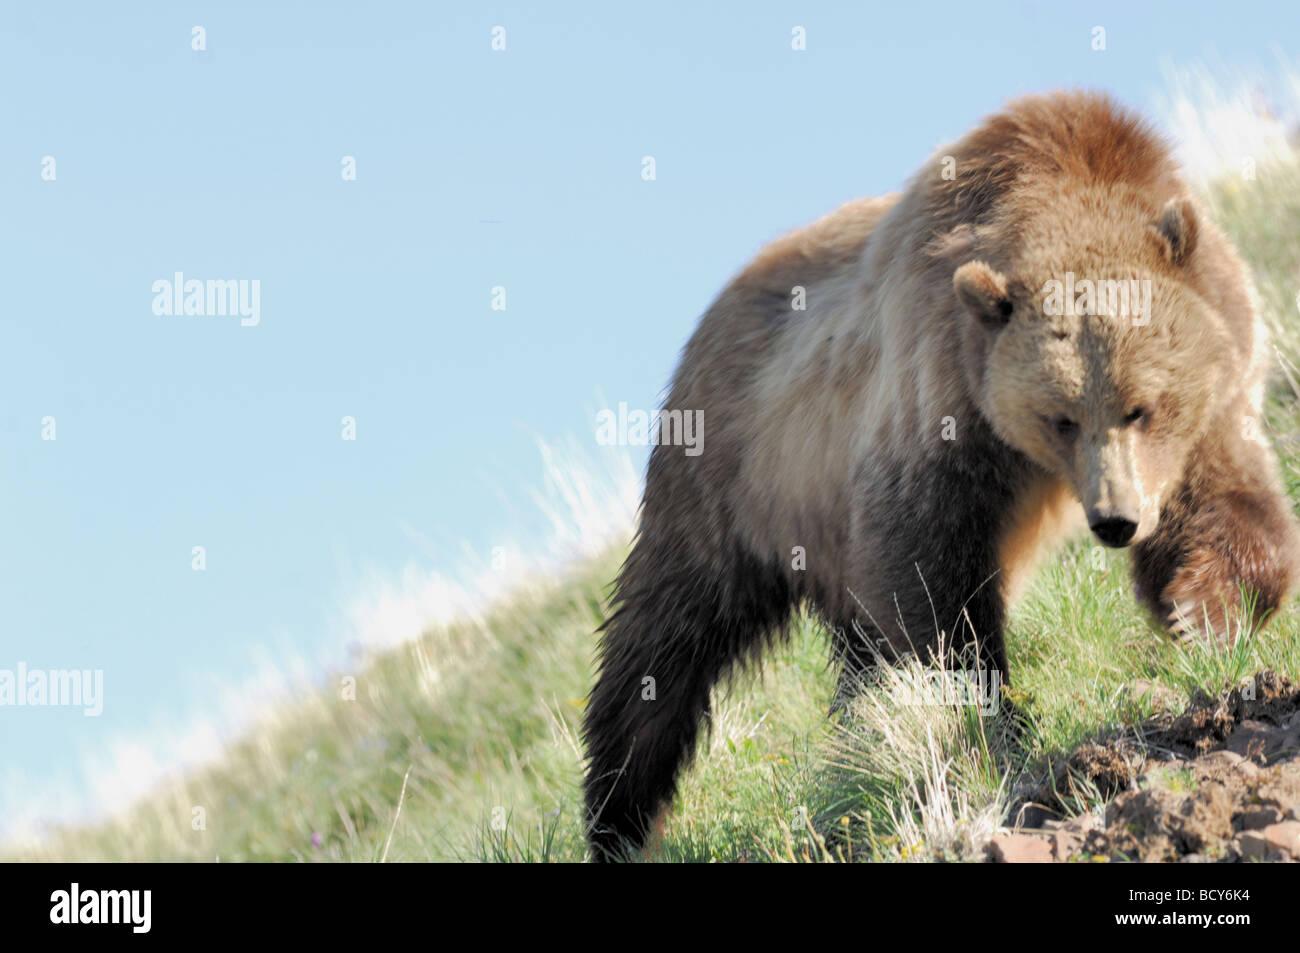 Stock photo of a grizzly bear walking along a hillside, Yellowstone National Park, Wyoming, USA, 2009. Stock Photo